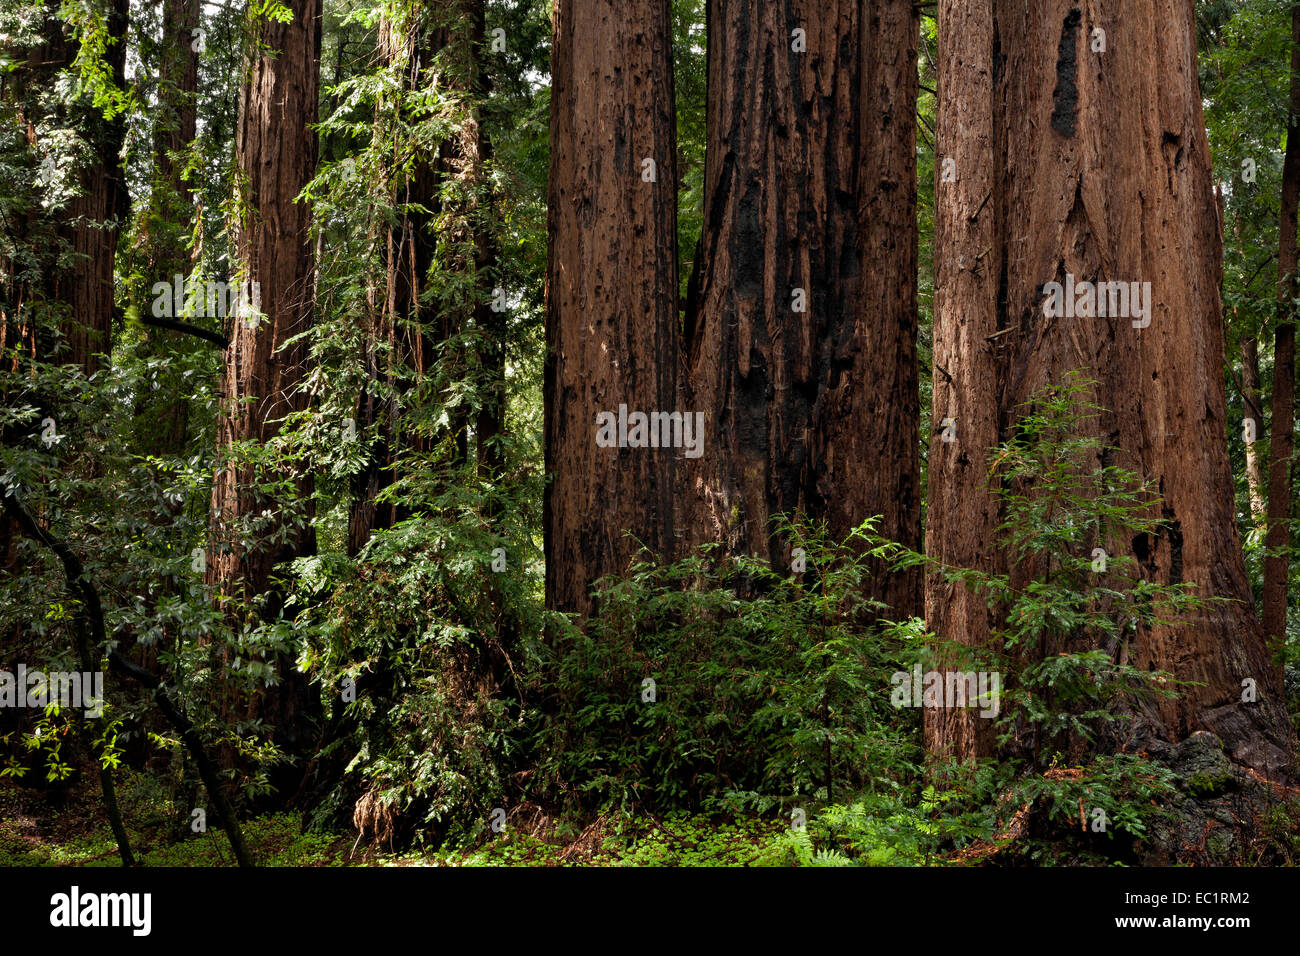 CA02445-00...CALIFORNIA - Redwood alberi lungo il Redwood Grove Loop Trail in Henry Cowell Redwoods State Park. Foto Stock